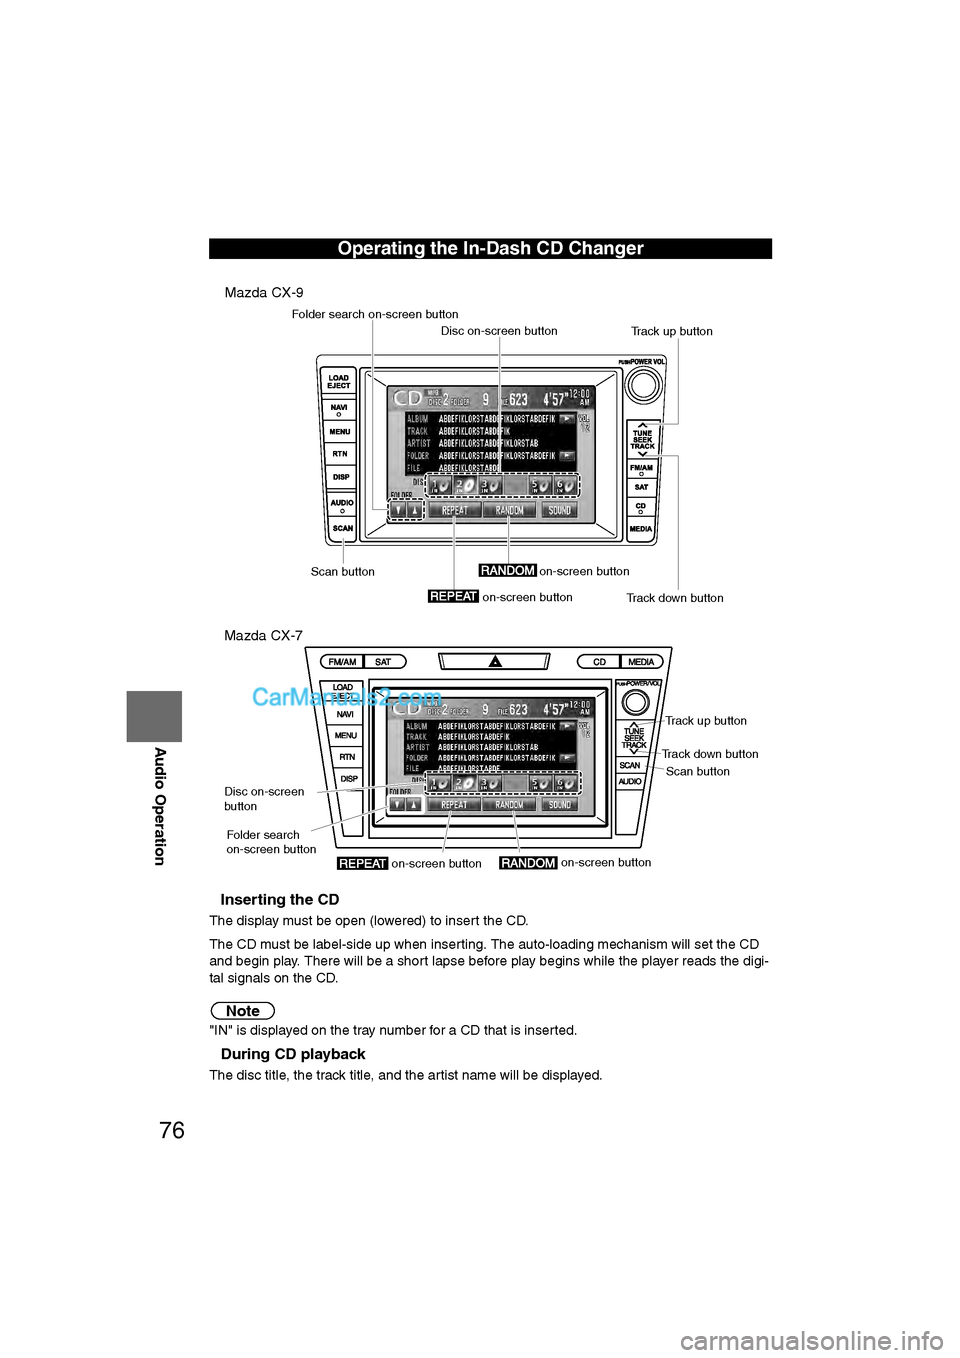 MAZDA MODEL CX-9 2008  Navigation Manual (in English) 76
Before 
UseGetting
started
RoutingAddress 
Book
Vo i c e  Recognition
Navigation 
Set Up
RDM-TMC
Audio Operation
Navigation 
Set Up
nInserting the CD
The display must be open (lowered) to insert th